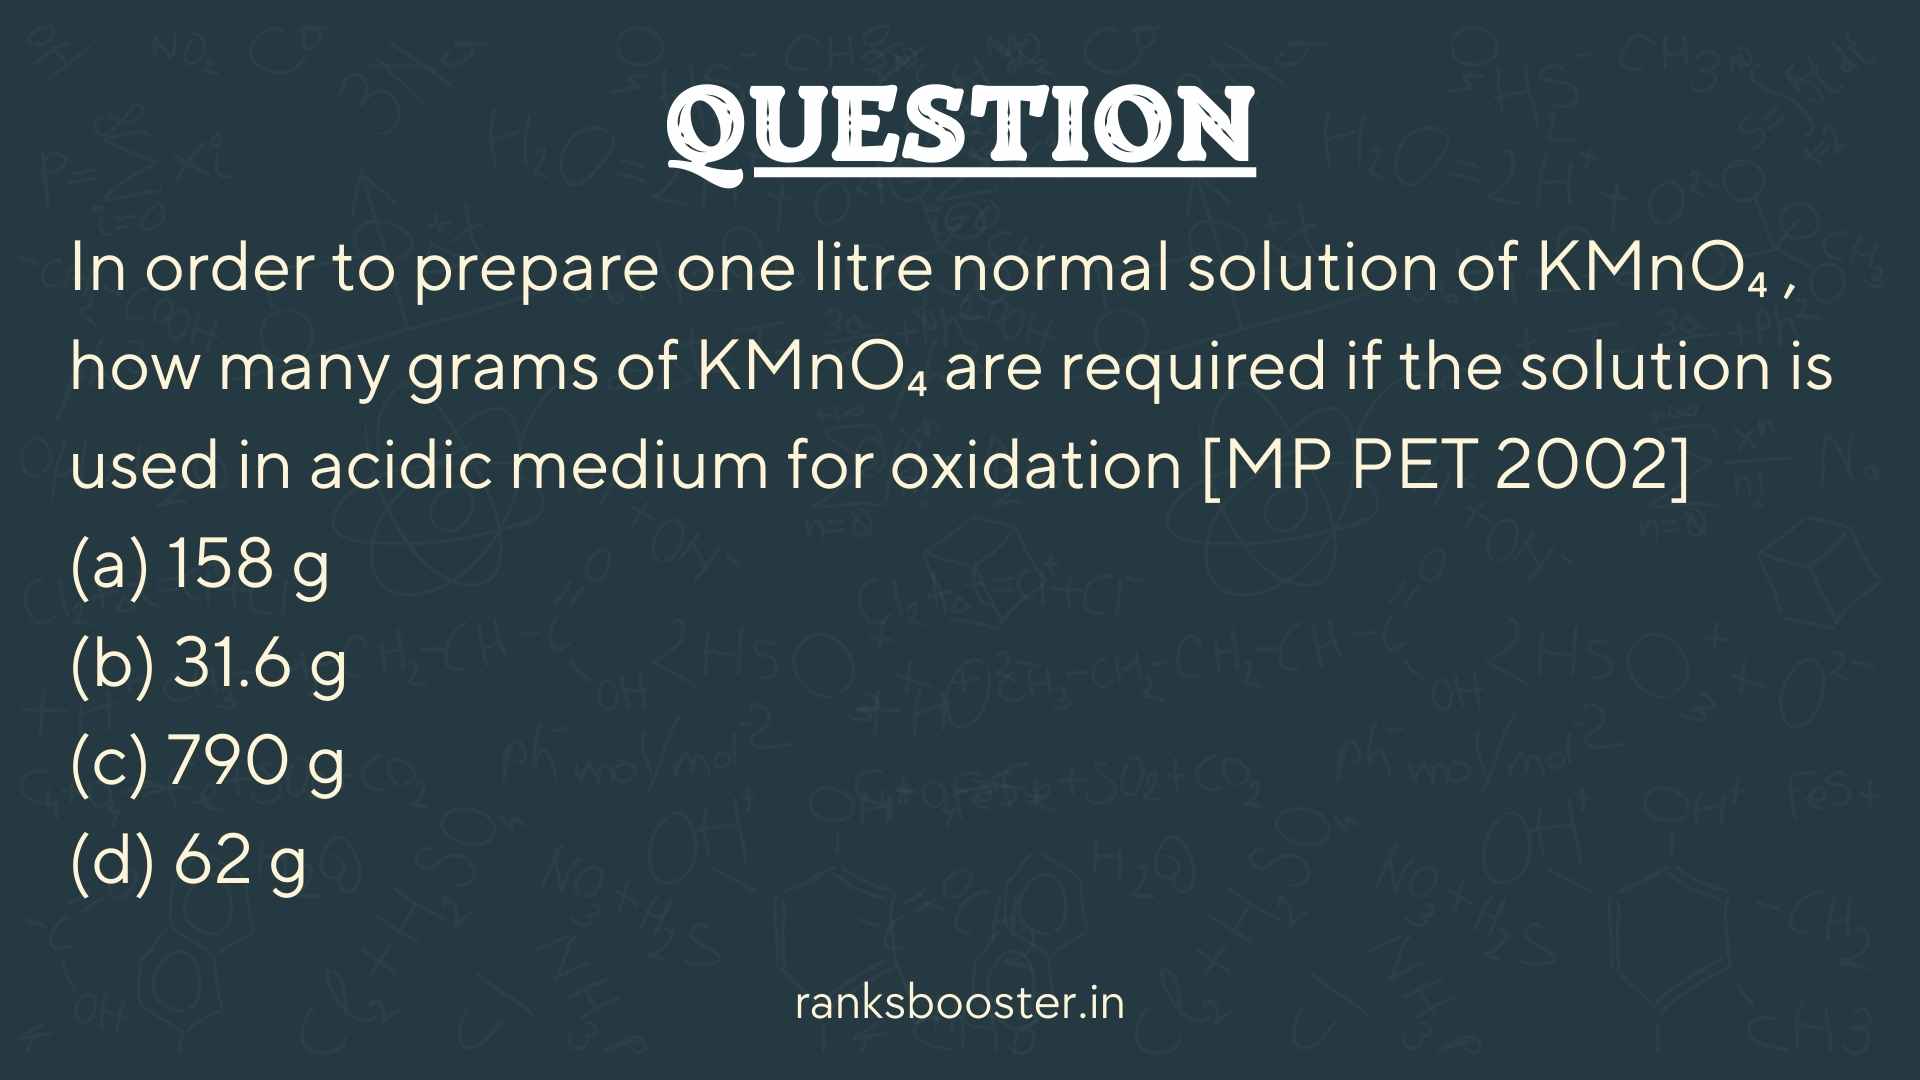 Question: In order to prepare one litre normal solution of KMnO₄ , how many grams of KMnO₄ are required if the solution is used in acidic medium for oxidation [MP PET 2002] (a) 158 g (b) 31.6 g (c) 790 g (d) 62 g